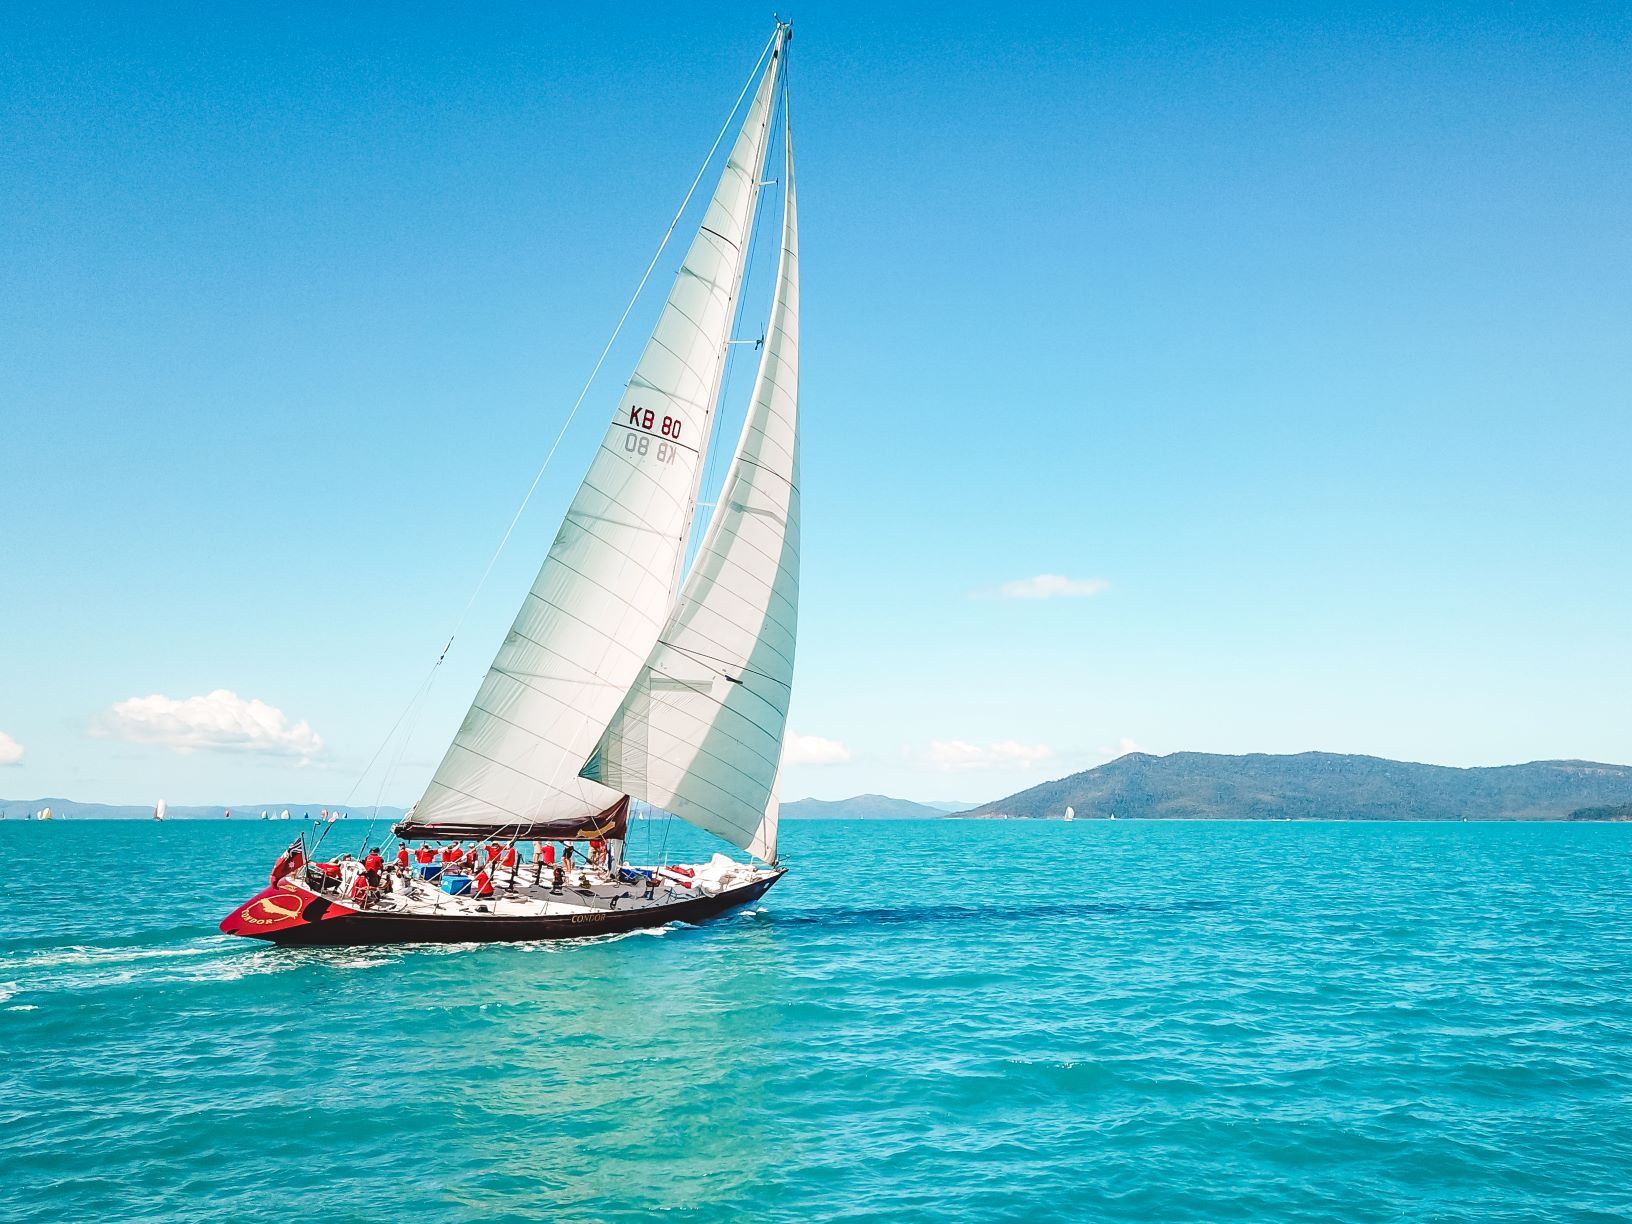 4 Day and 3 Night Whitsunday Maxi Sailing Adventure on Condor